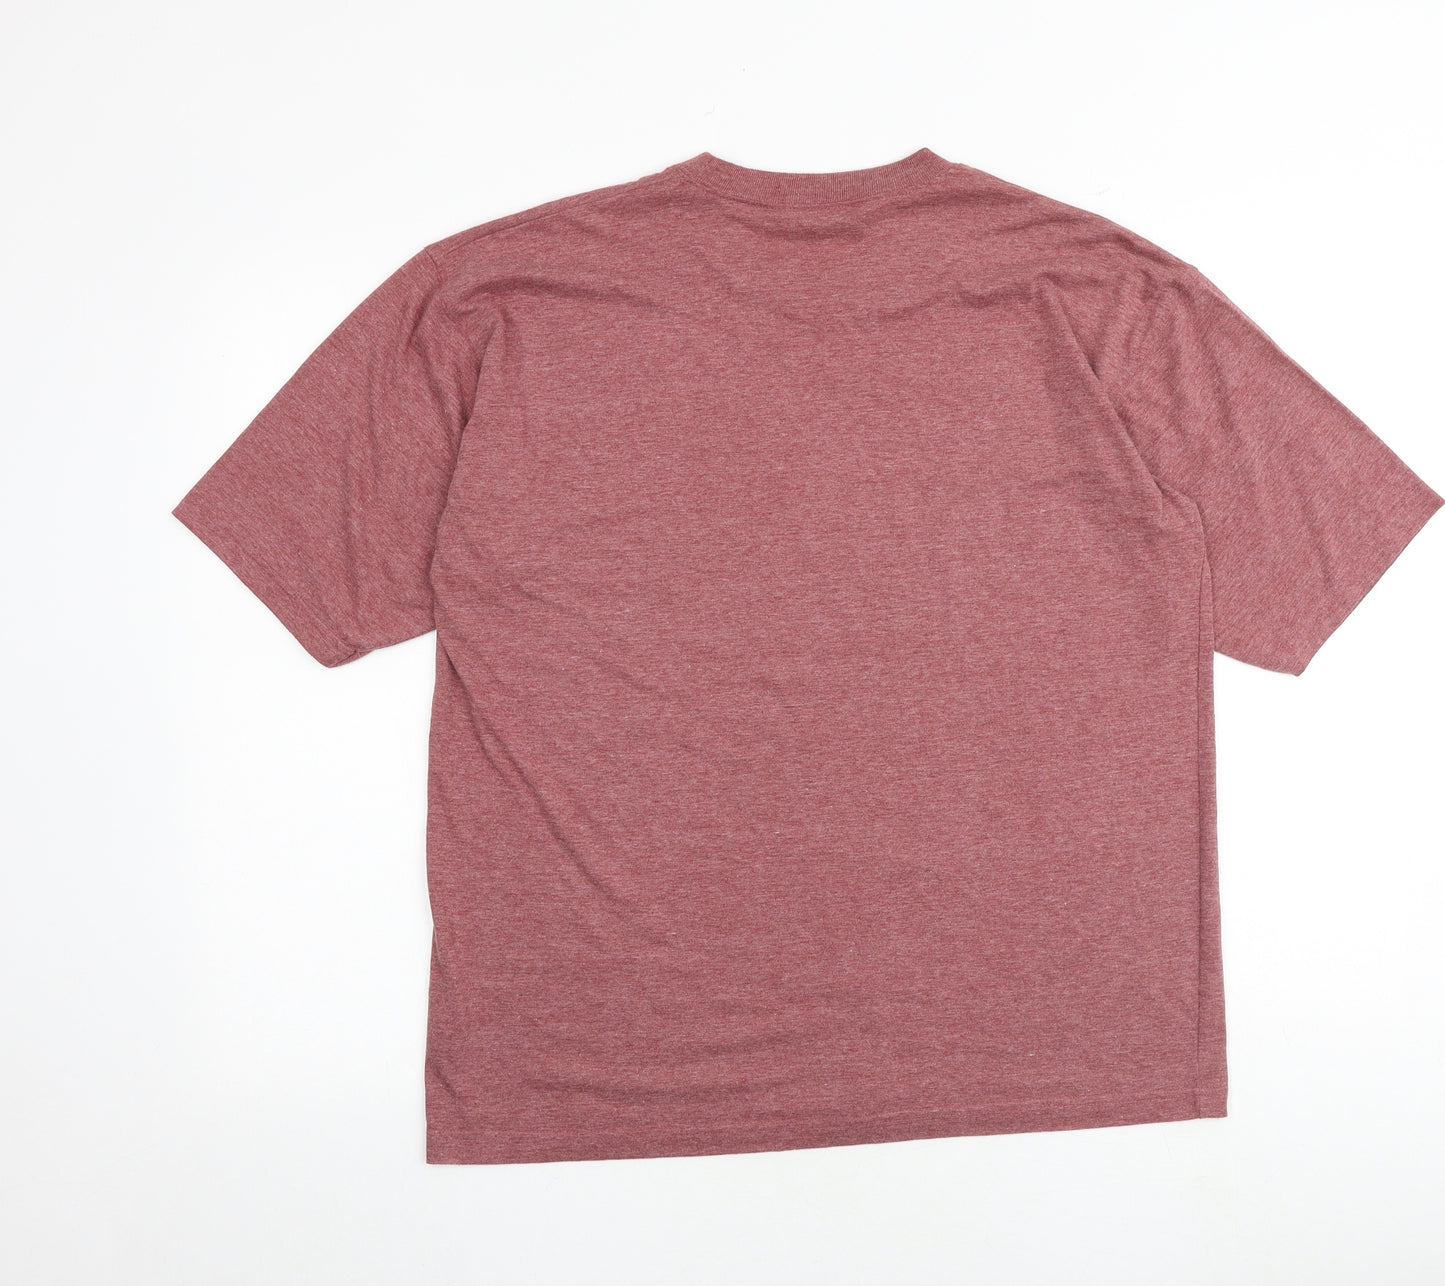 MC Casuals Mens Red Cotton T-Shirt Size M Round Neck